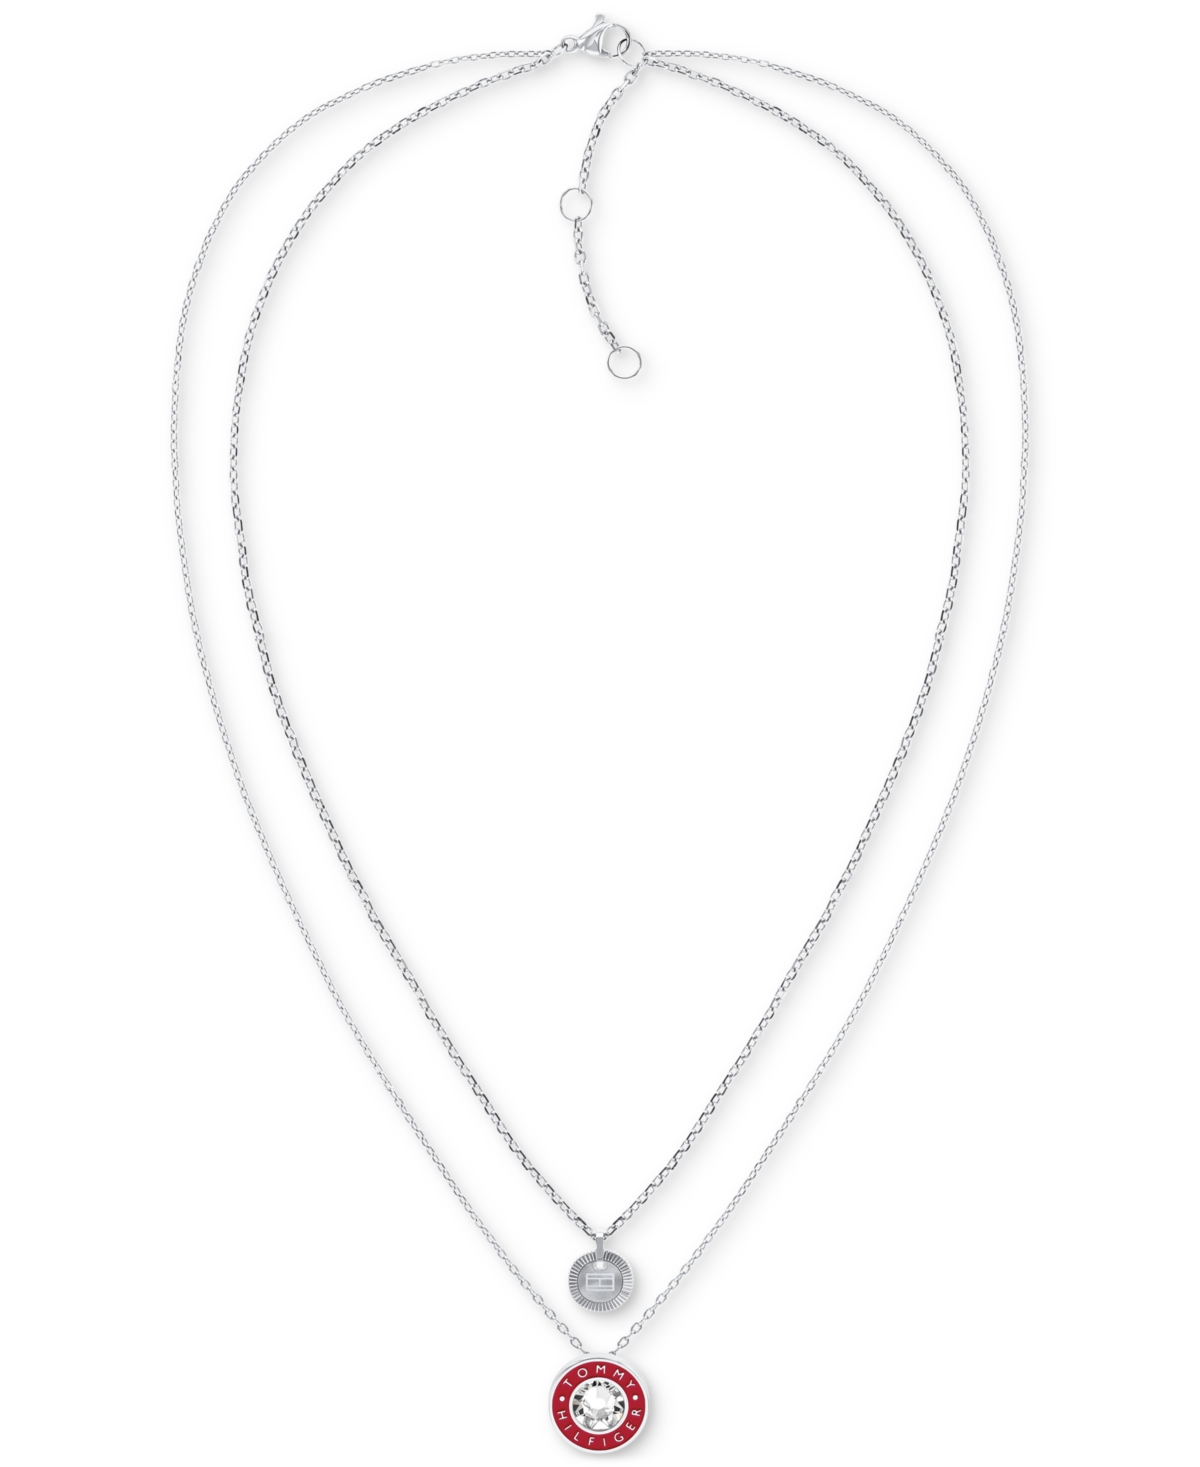 Tommy Hilfiger Stainless Steel Red Enamel & Stone Two-row Pendant Necklace, 18" + 2" Extender In Silver